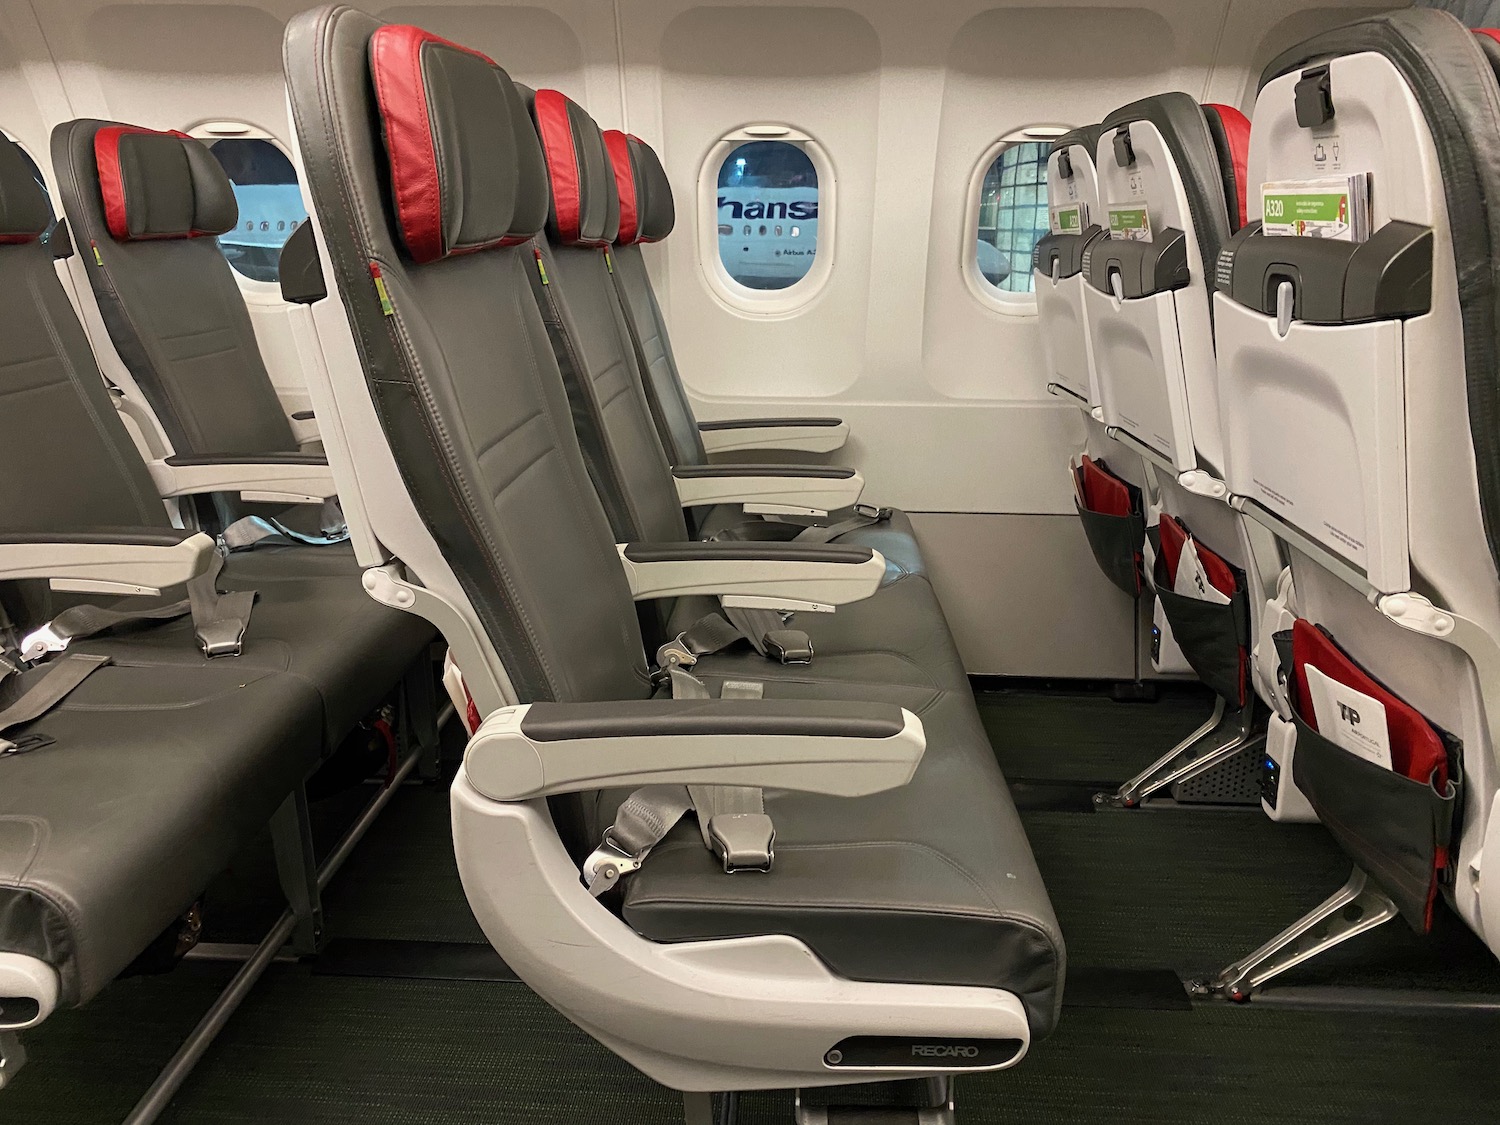 Planet Ved salgsplan Review: TAP Air Portugal A320 Business Class - Live and Let's Fly